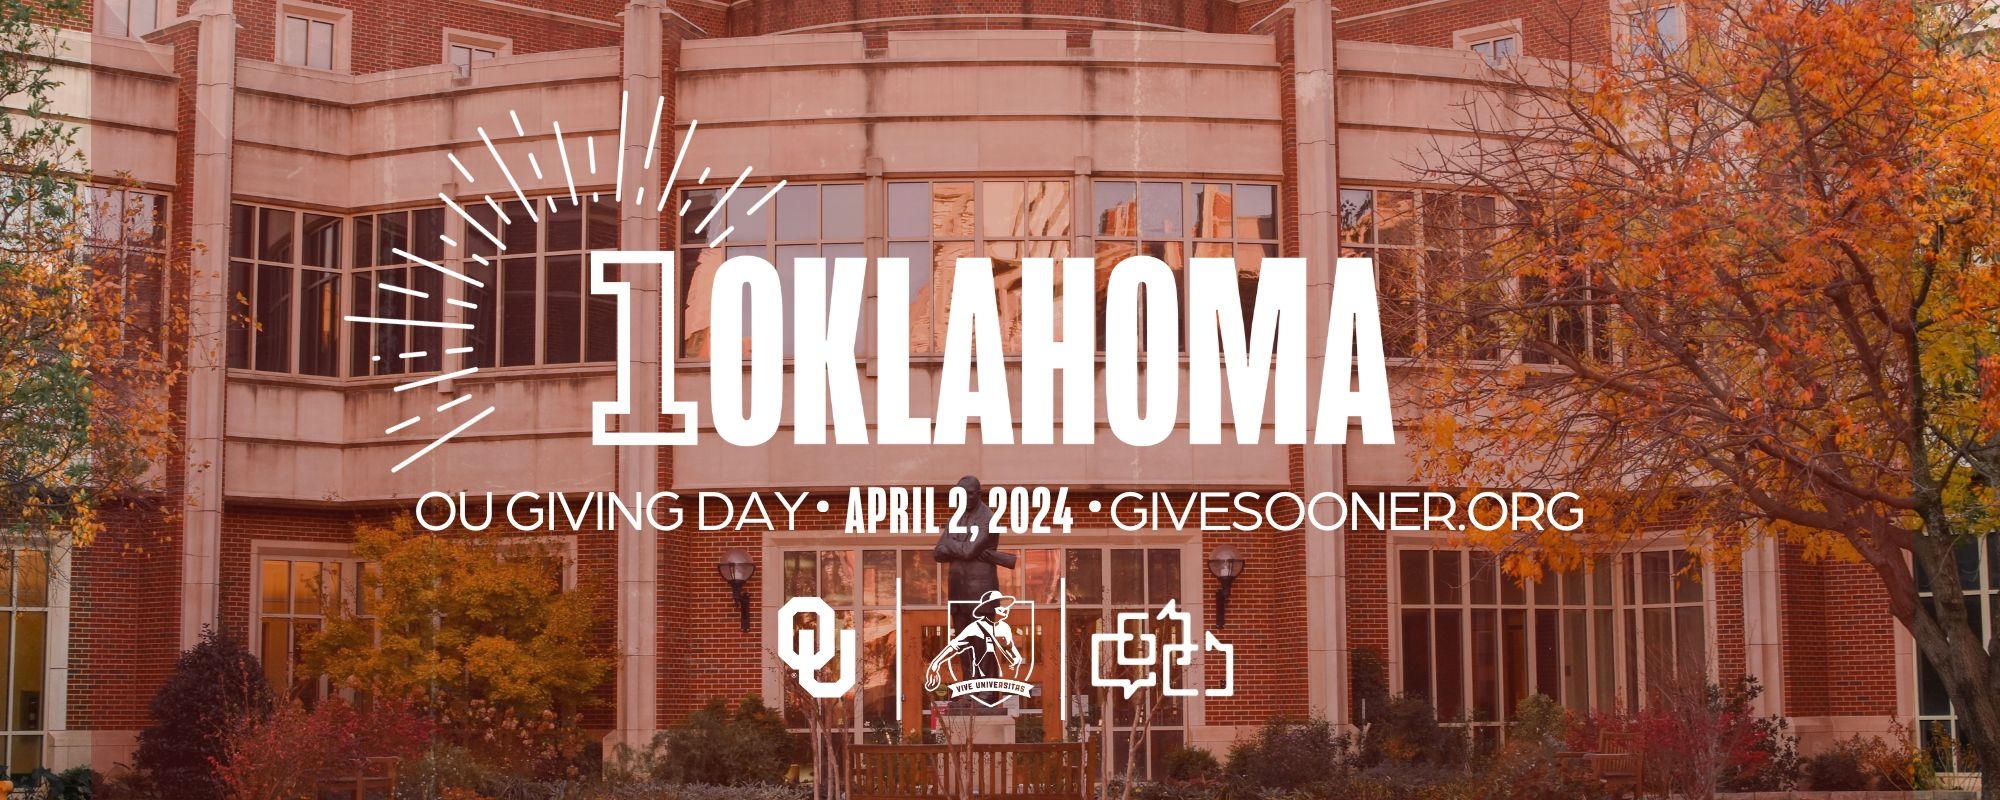 One Oklahoma. OU Giving Day, April 2, 2024. givesooner.org. Logos for OU, The OU Foundation, and Gaylord College.